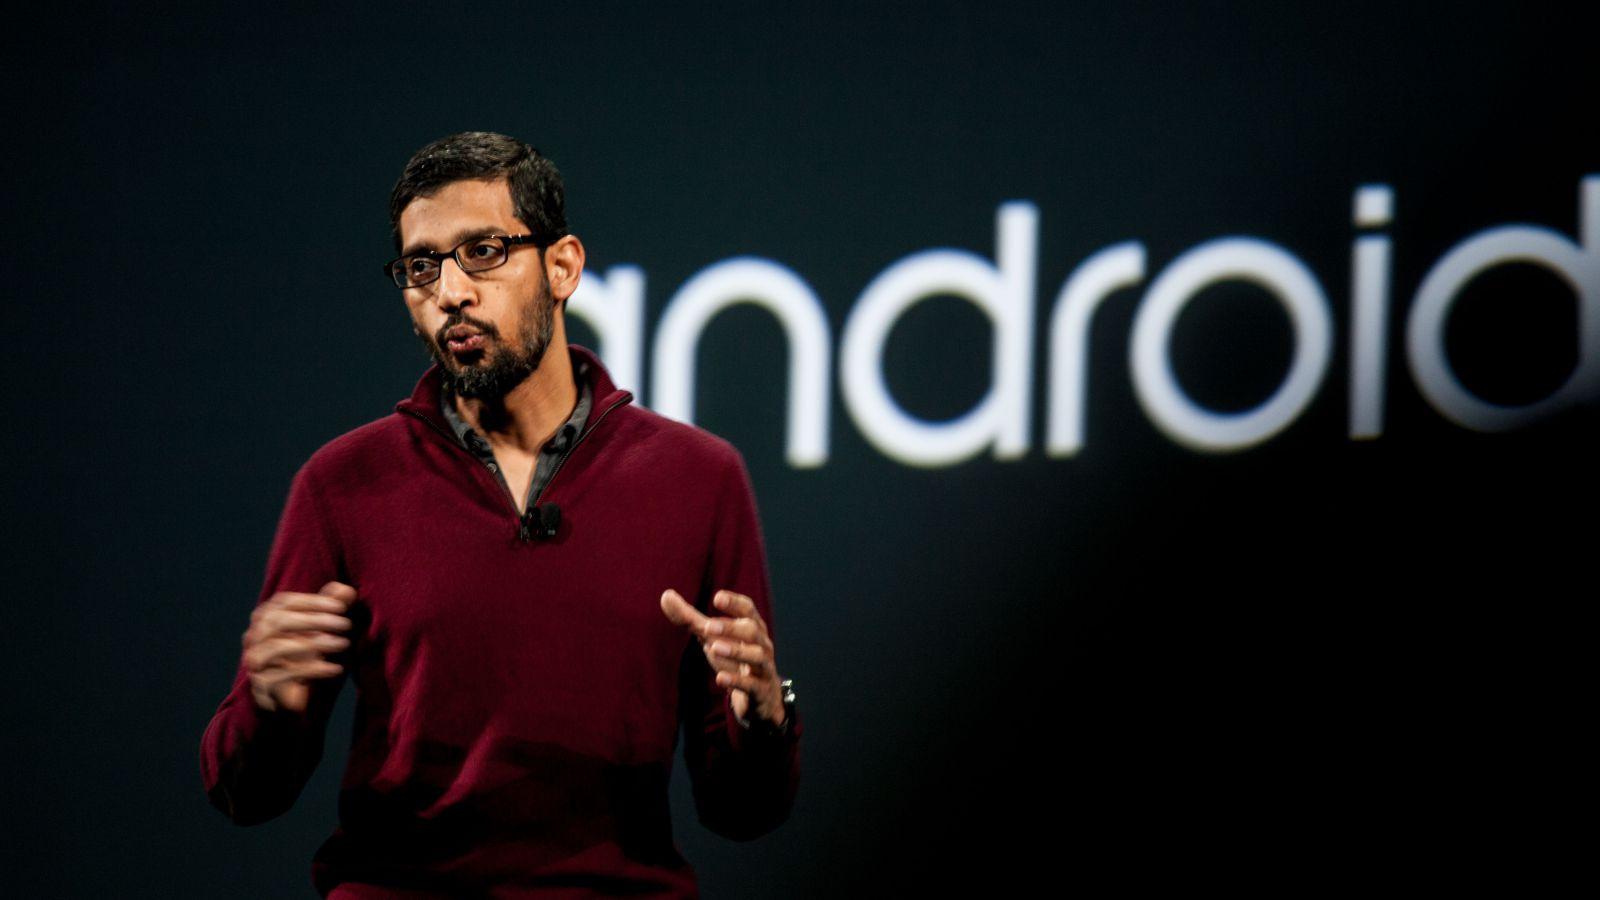 One student asked Sundar Pichai How might I replace you at Google